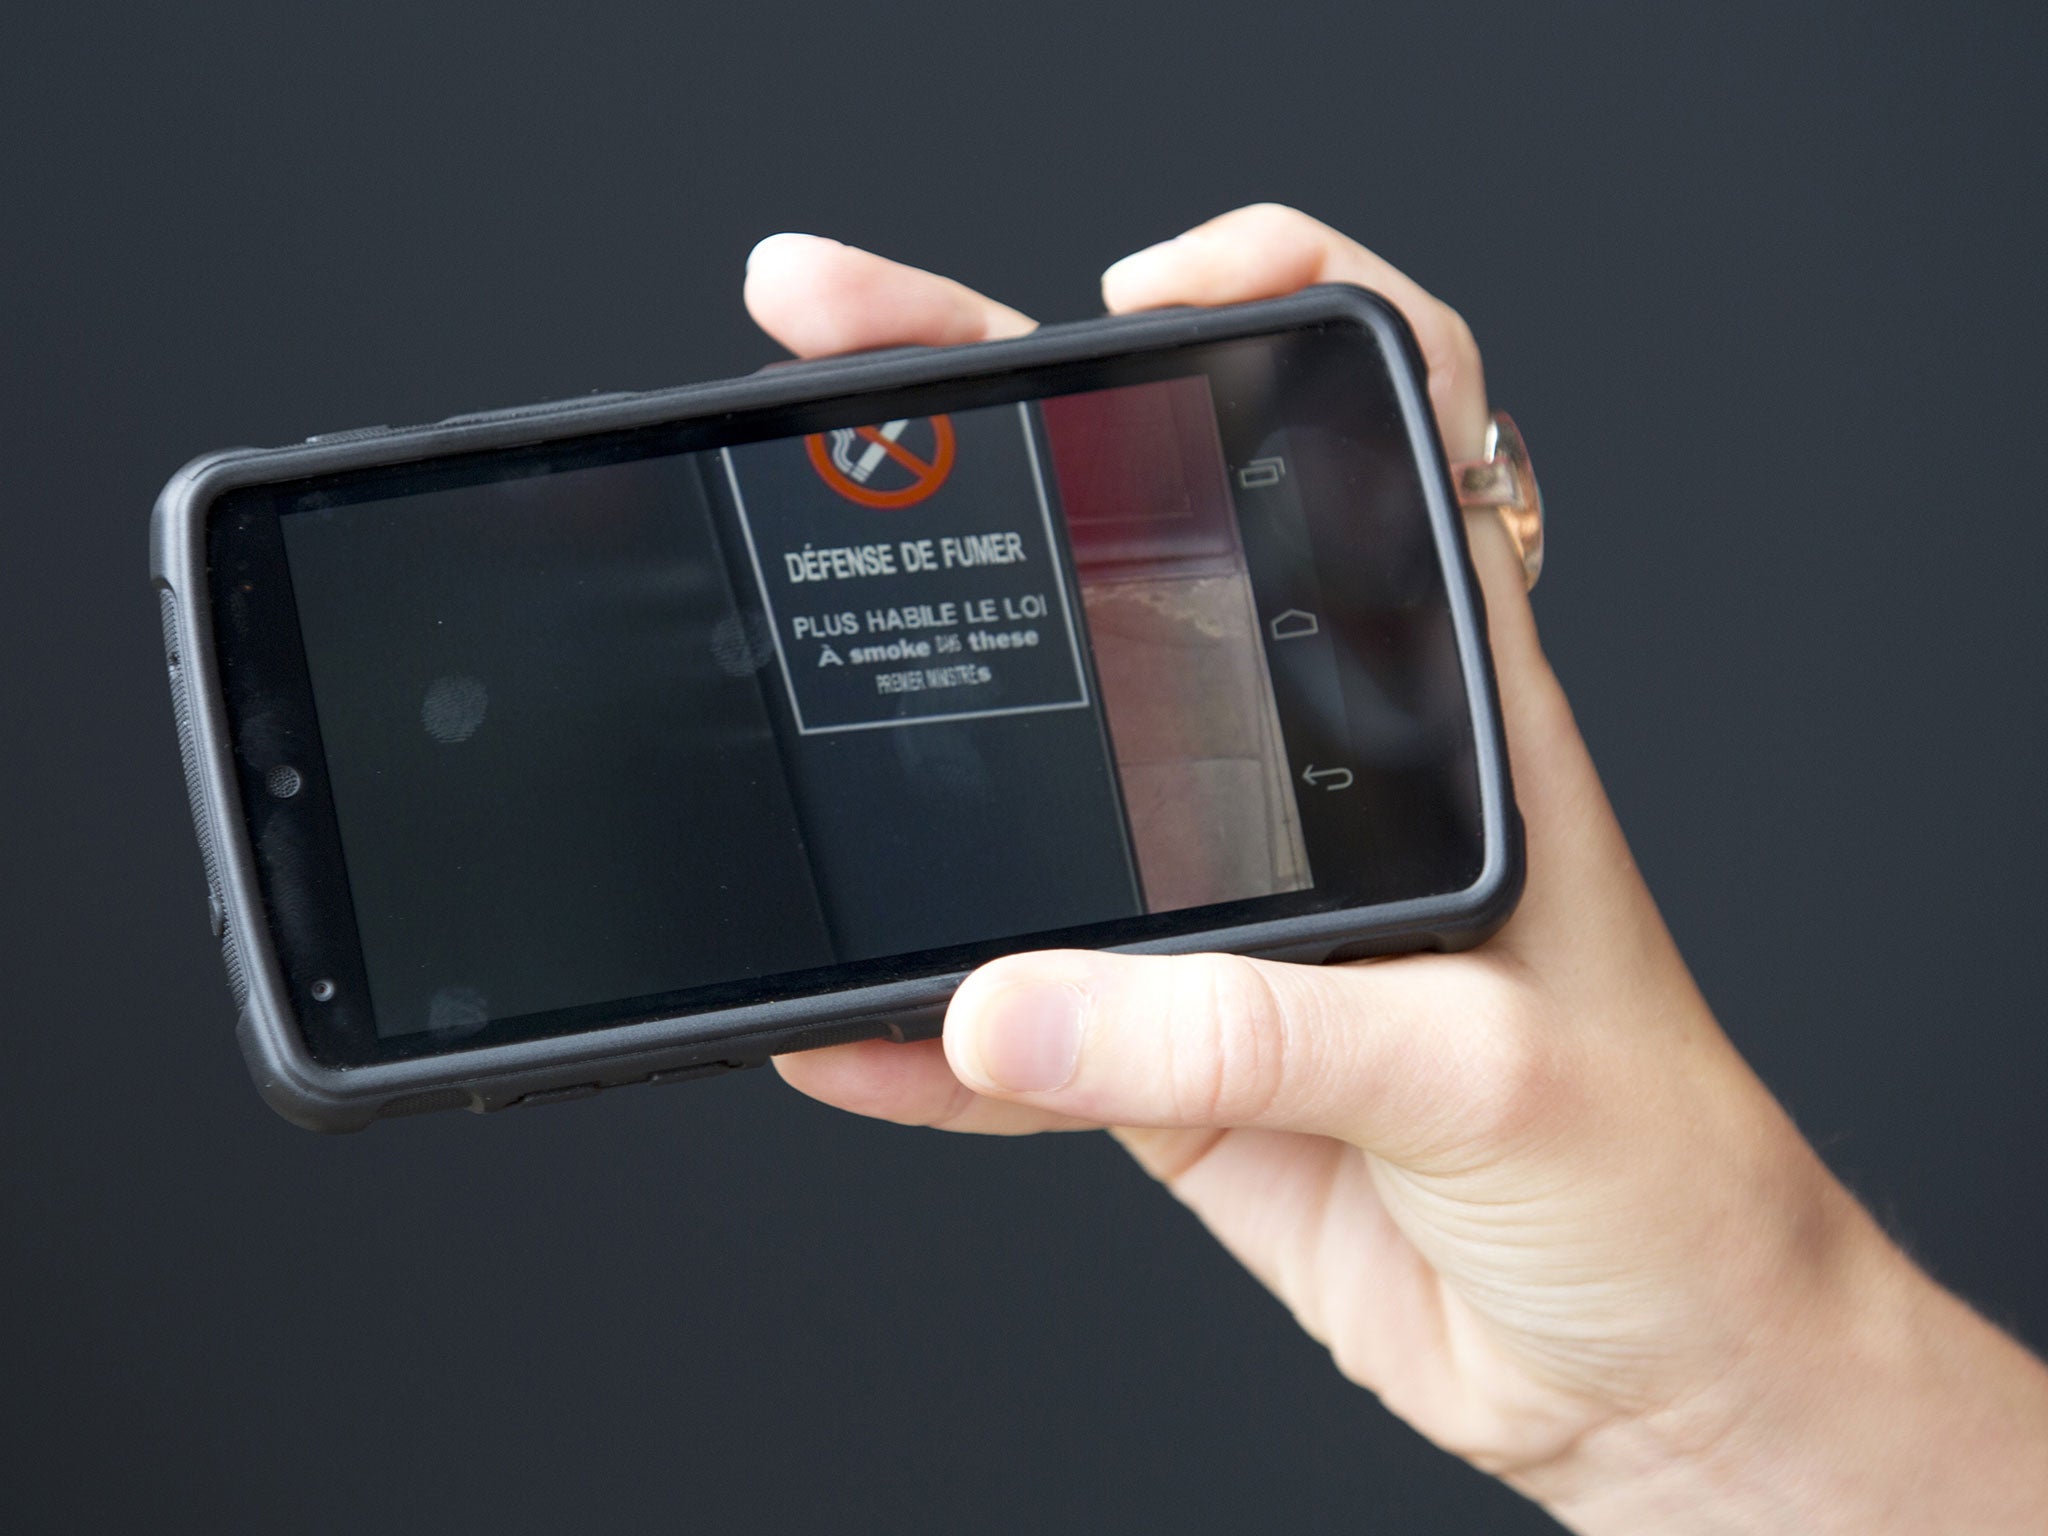 Google Glass replicated the translate function on a smartphone instantly